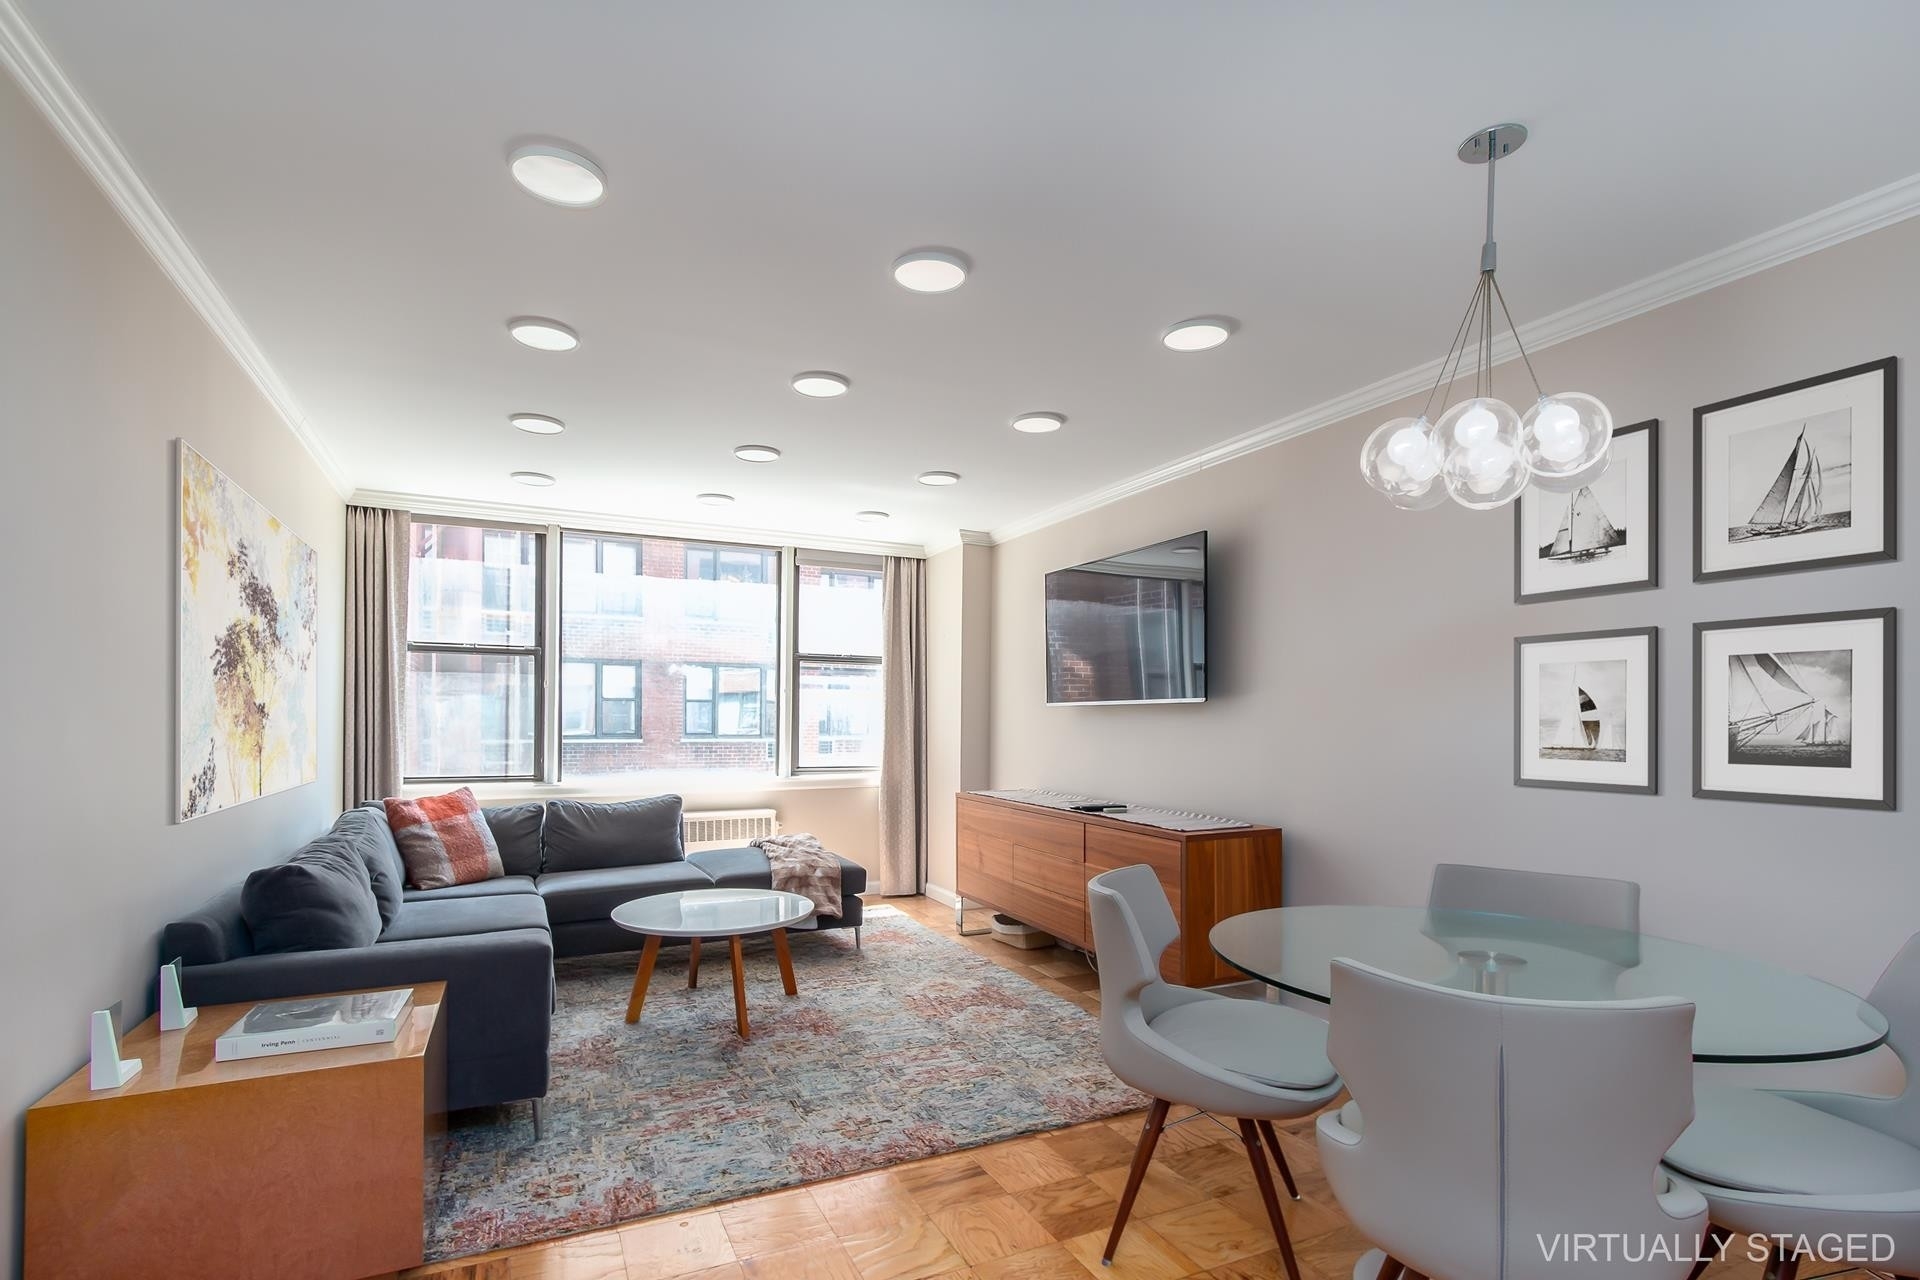 Co-op Properties for Sale at The Gloucester, 200 W 79TH ST, 9B Upper West Side, New York, New York 10024